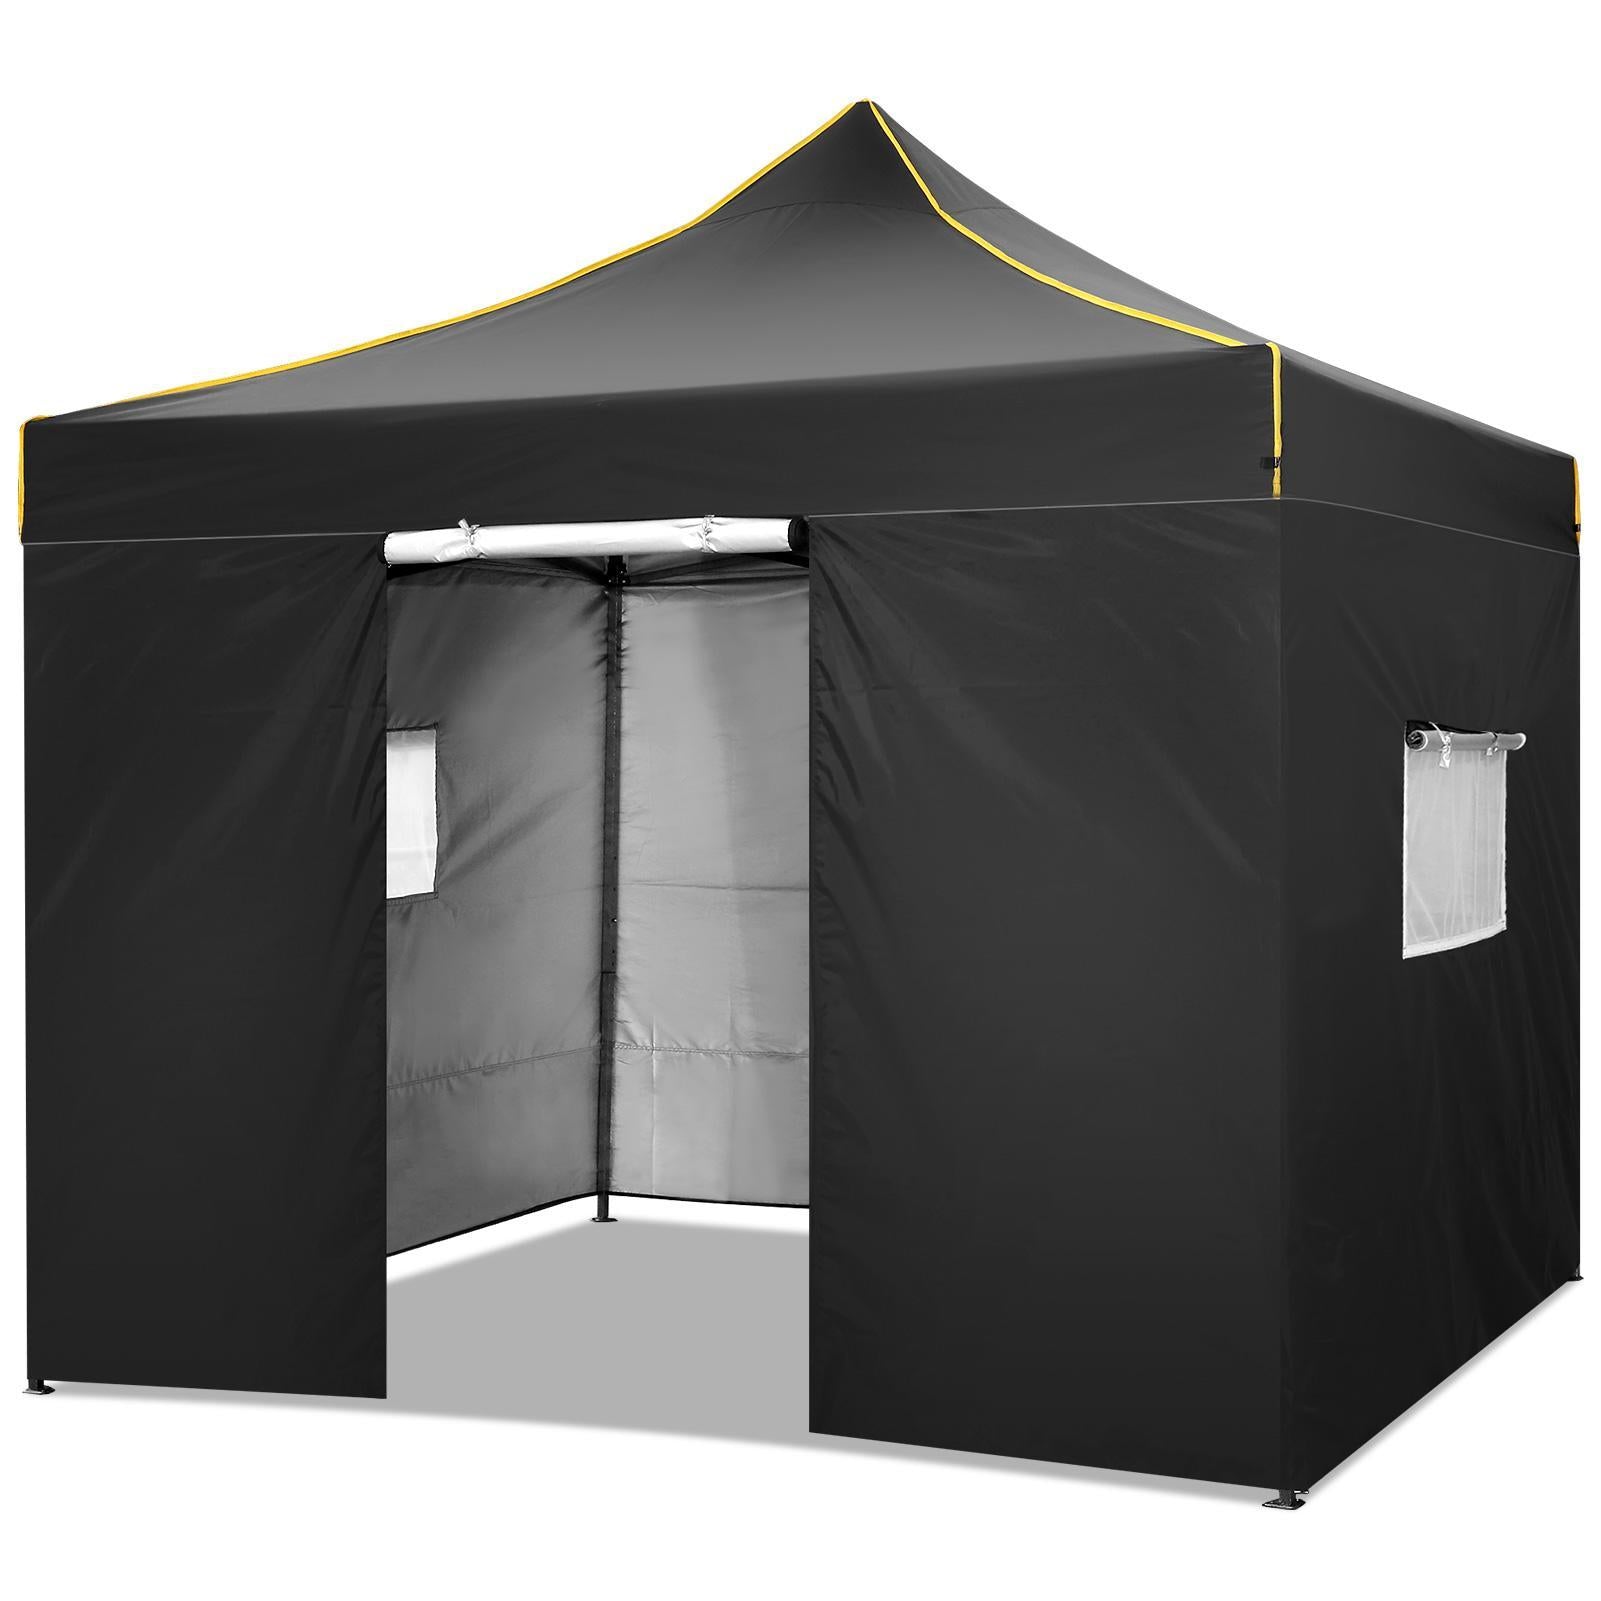 Likein 10x10Ft Pop Up Canopy Tent, Outdoor Camping Canopy with 4 Removable Sidewalls, Festival Tailgate Event Craft Show Instant Shelter with Carry Bag - Warehouse Clearance Black